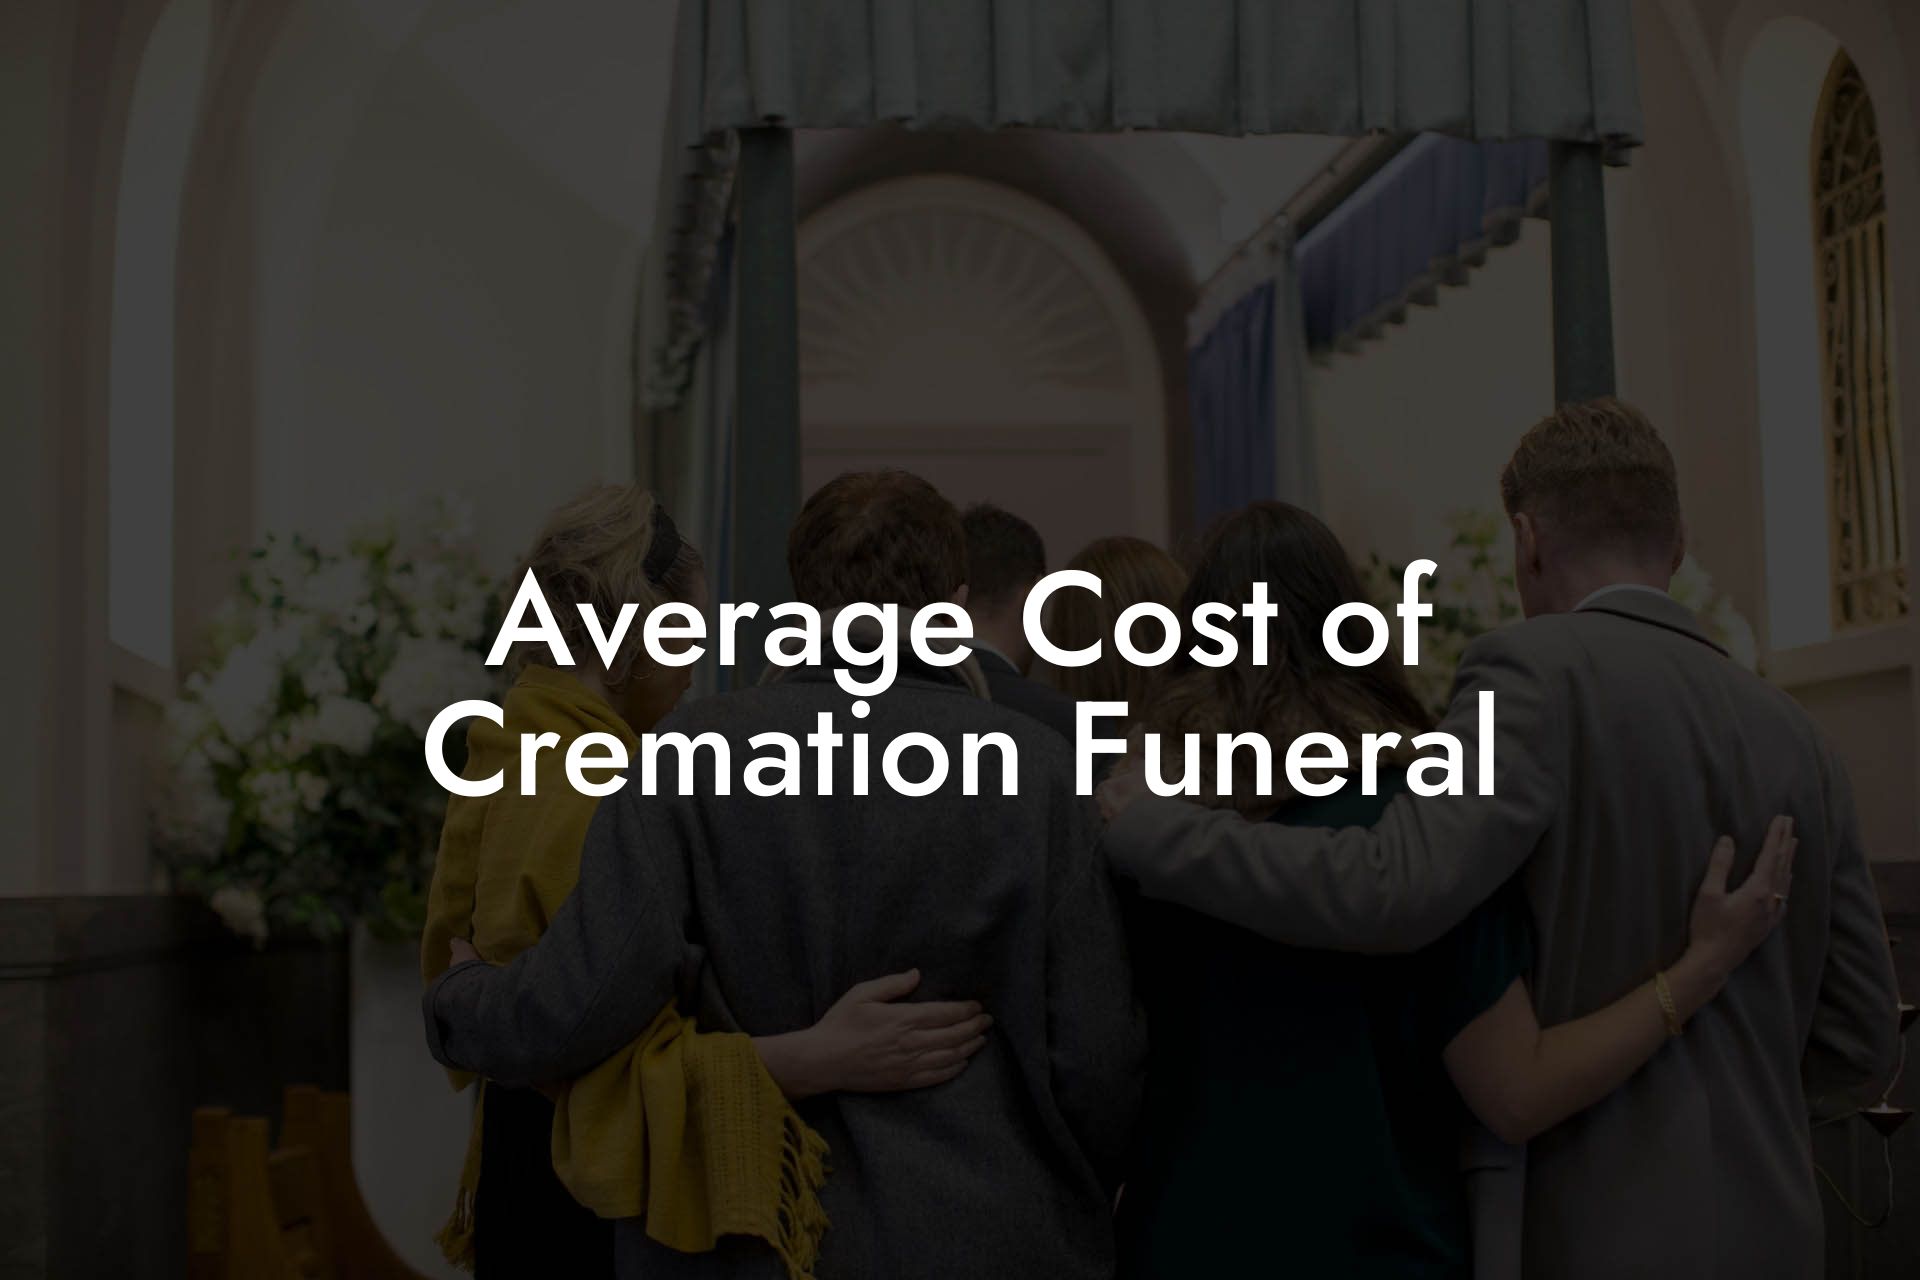 Average Cost of Cremation Funeral